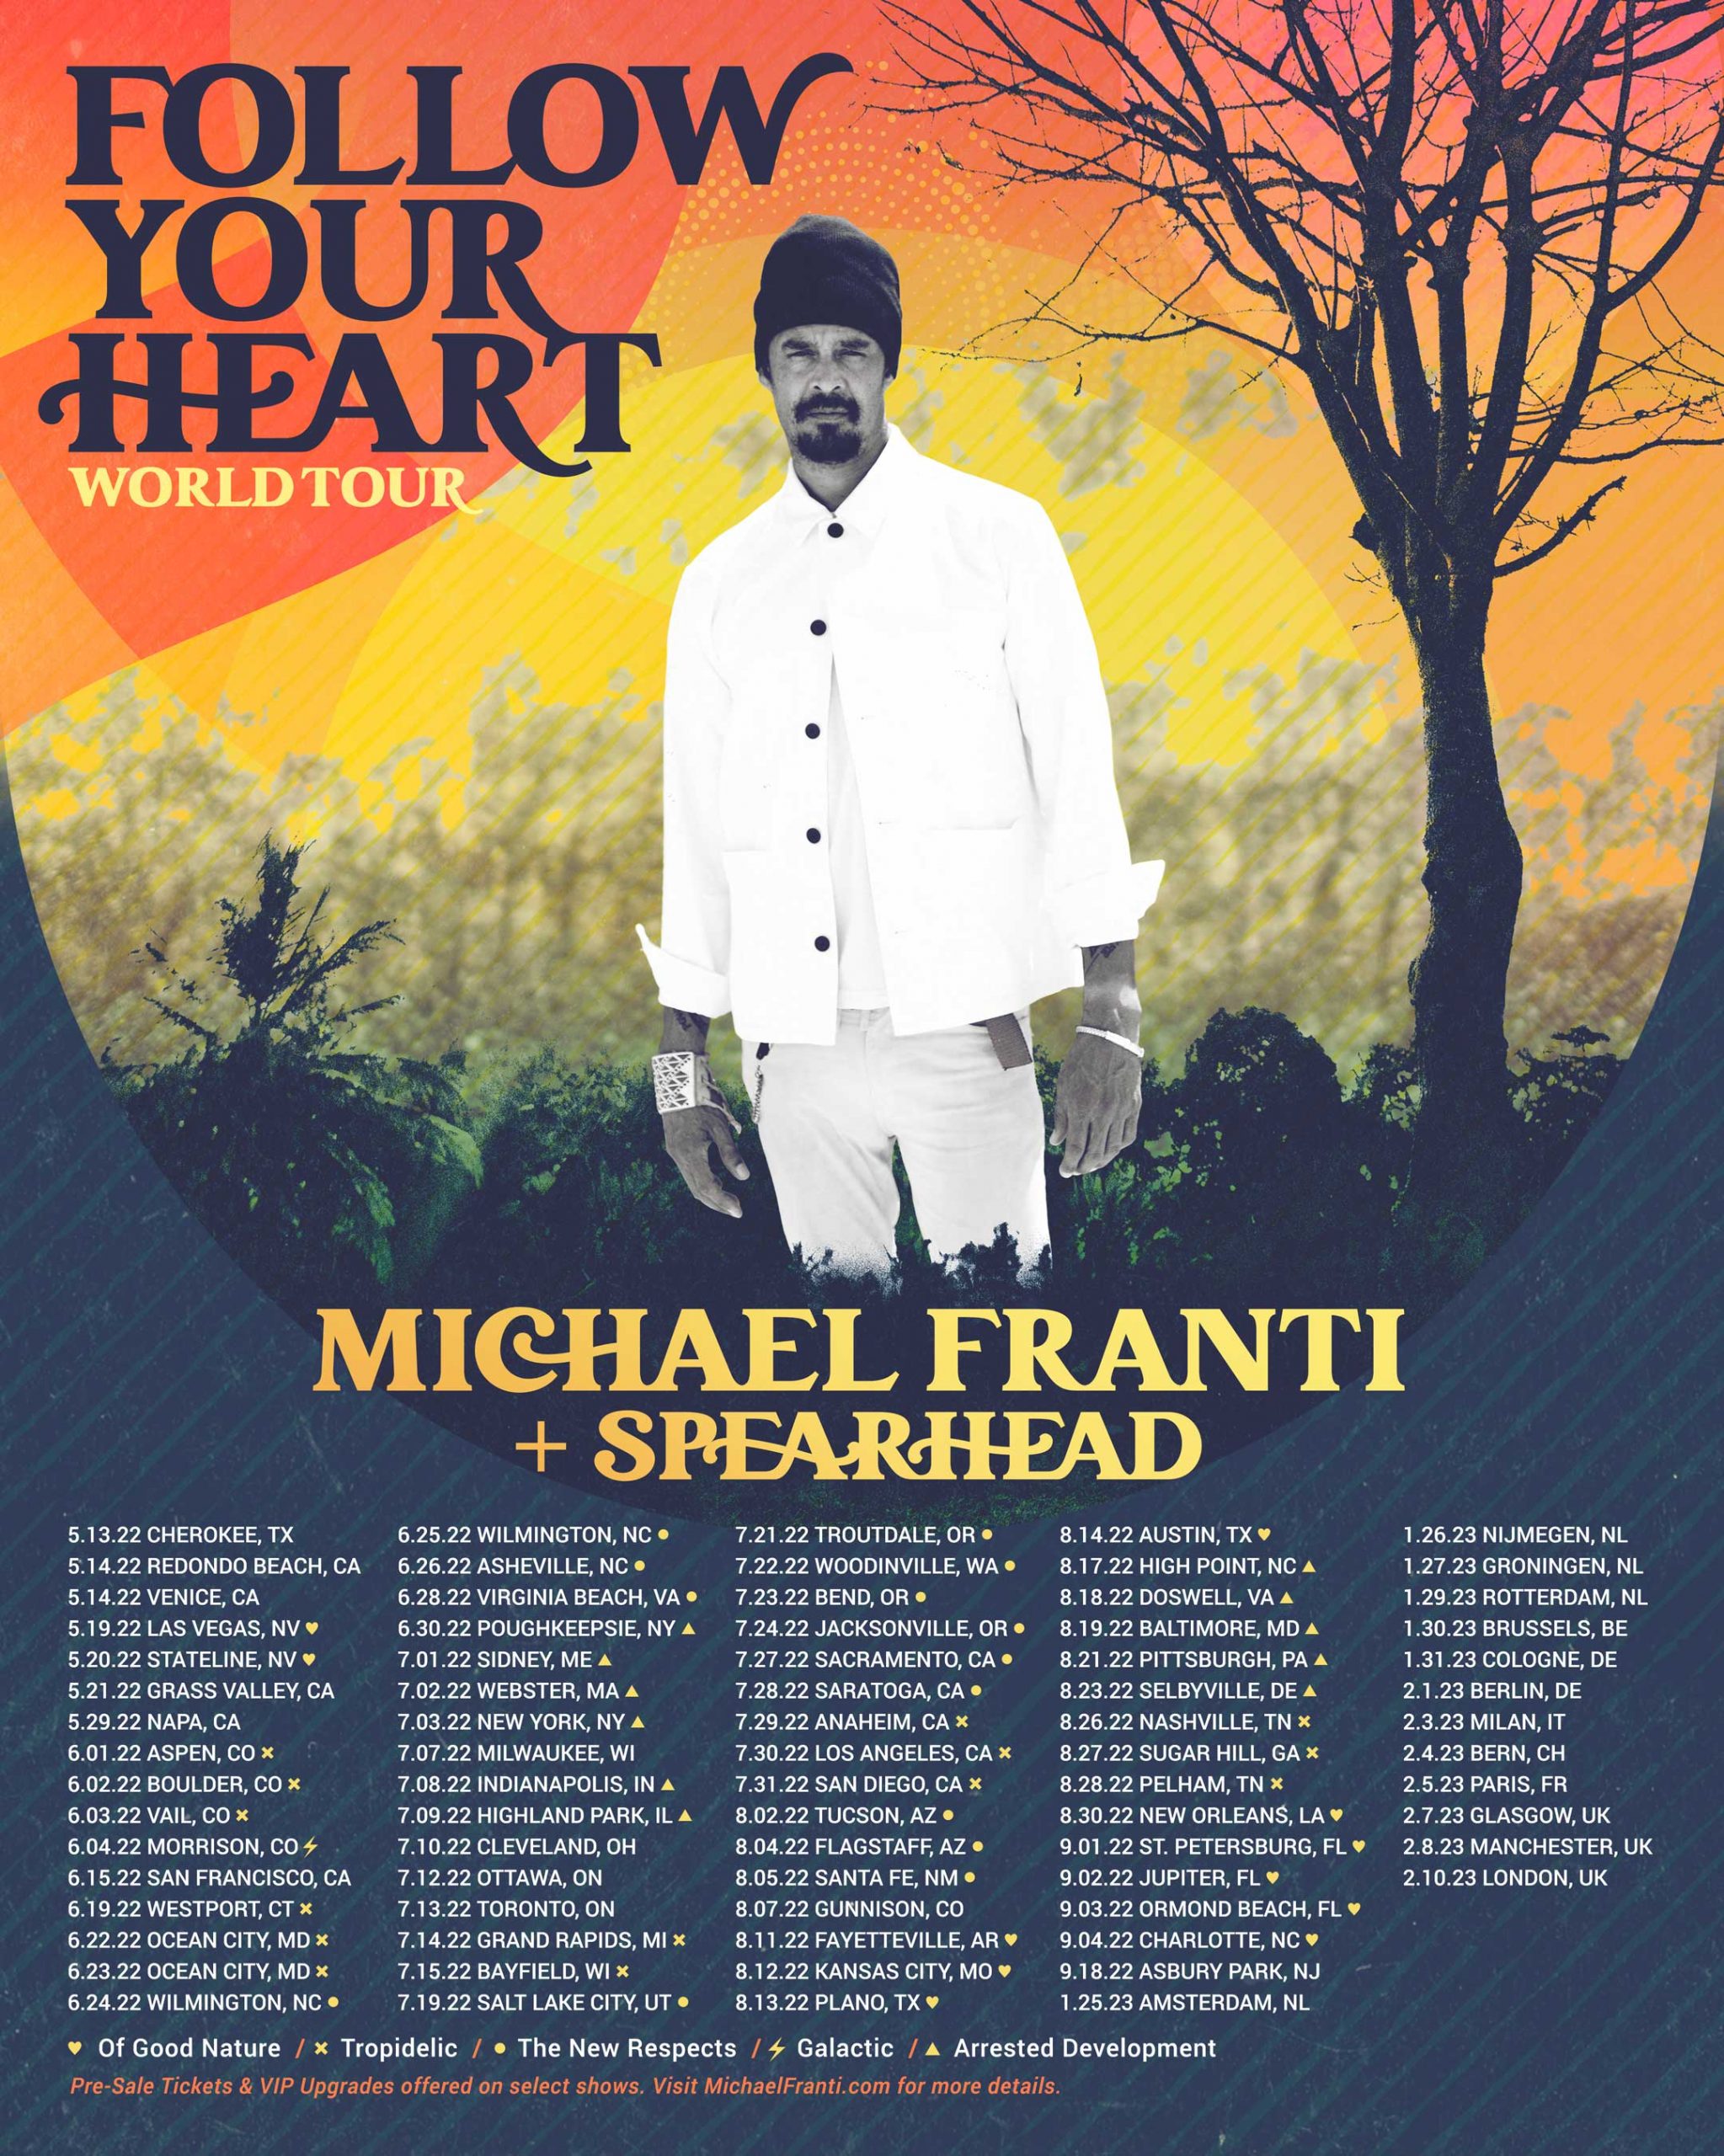 NEW FOLLOW YOUR HEART TOUR DATES ADDED!